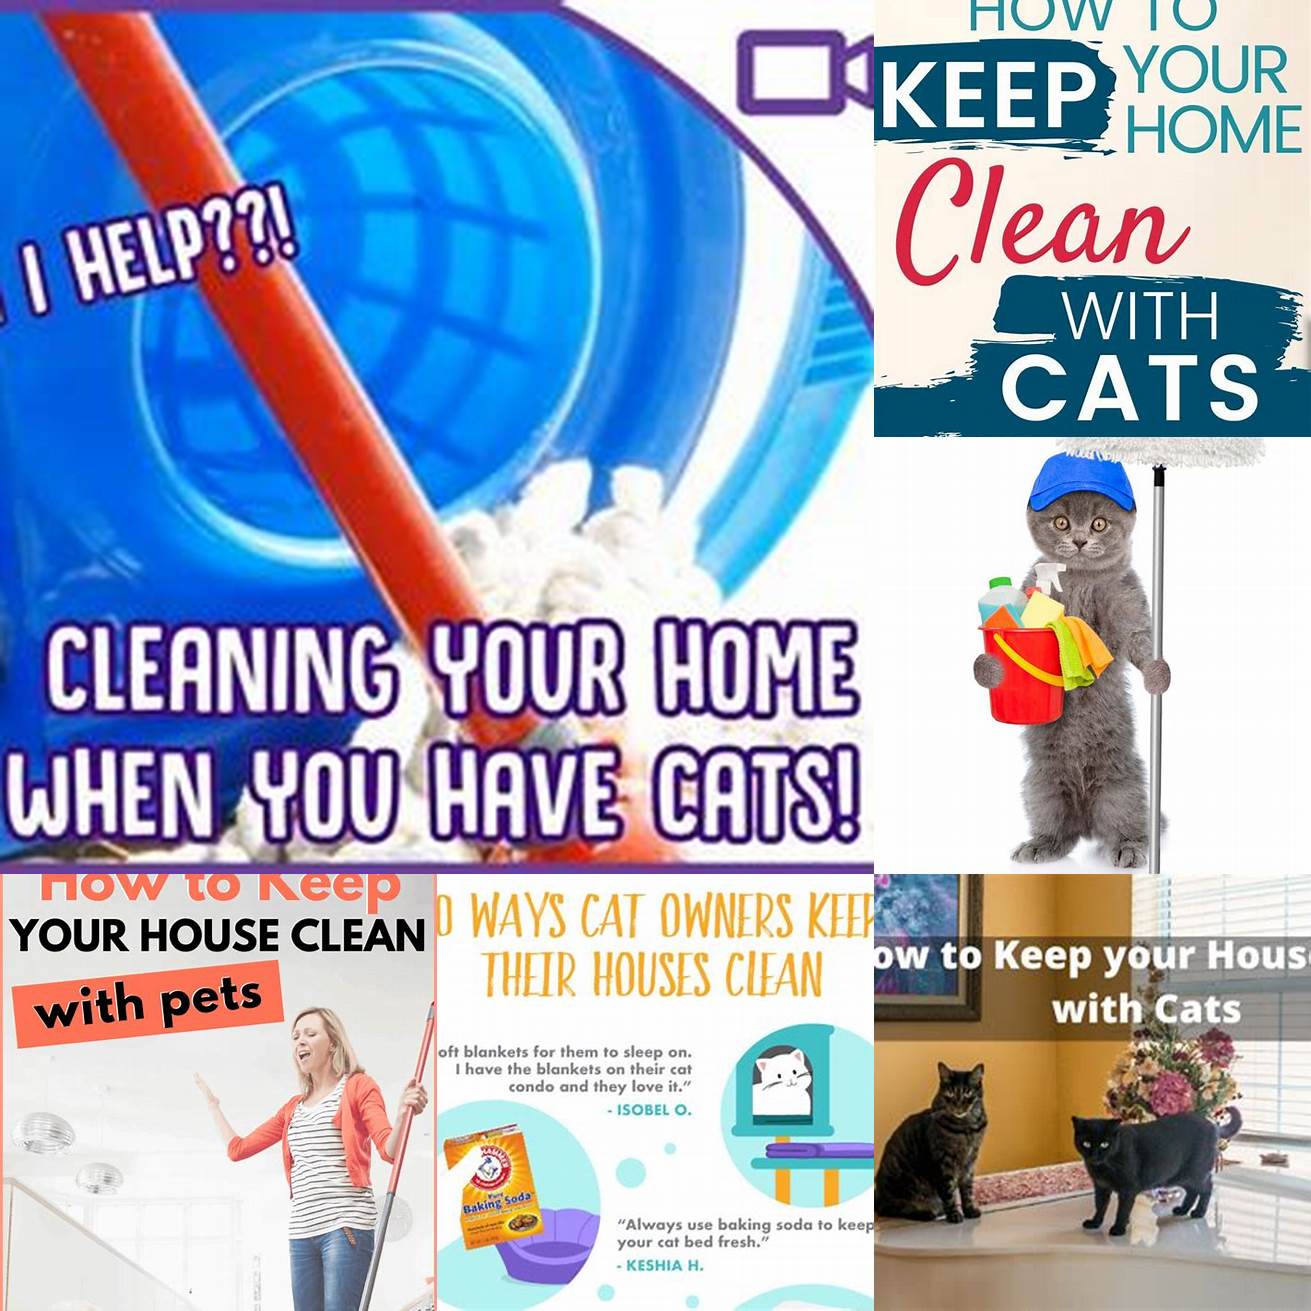 Keeps your home cleaner